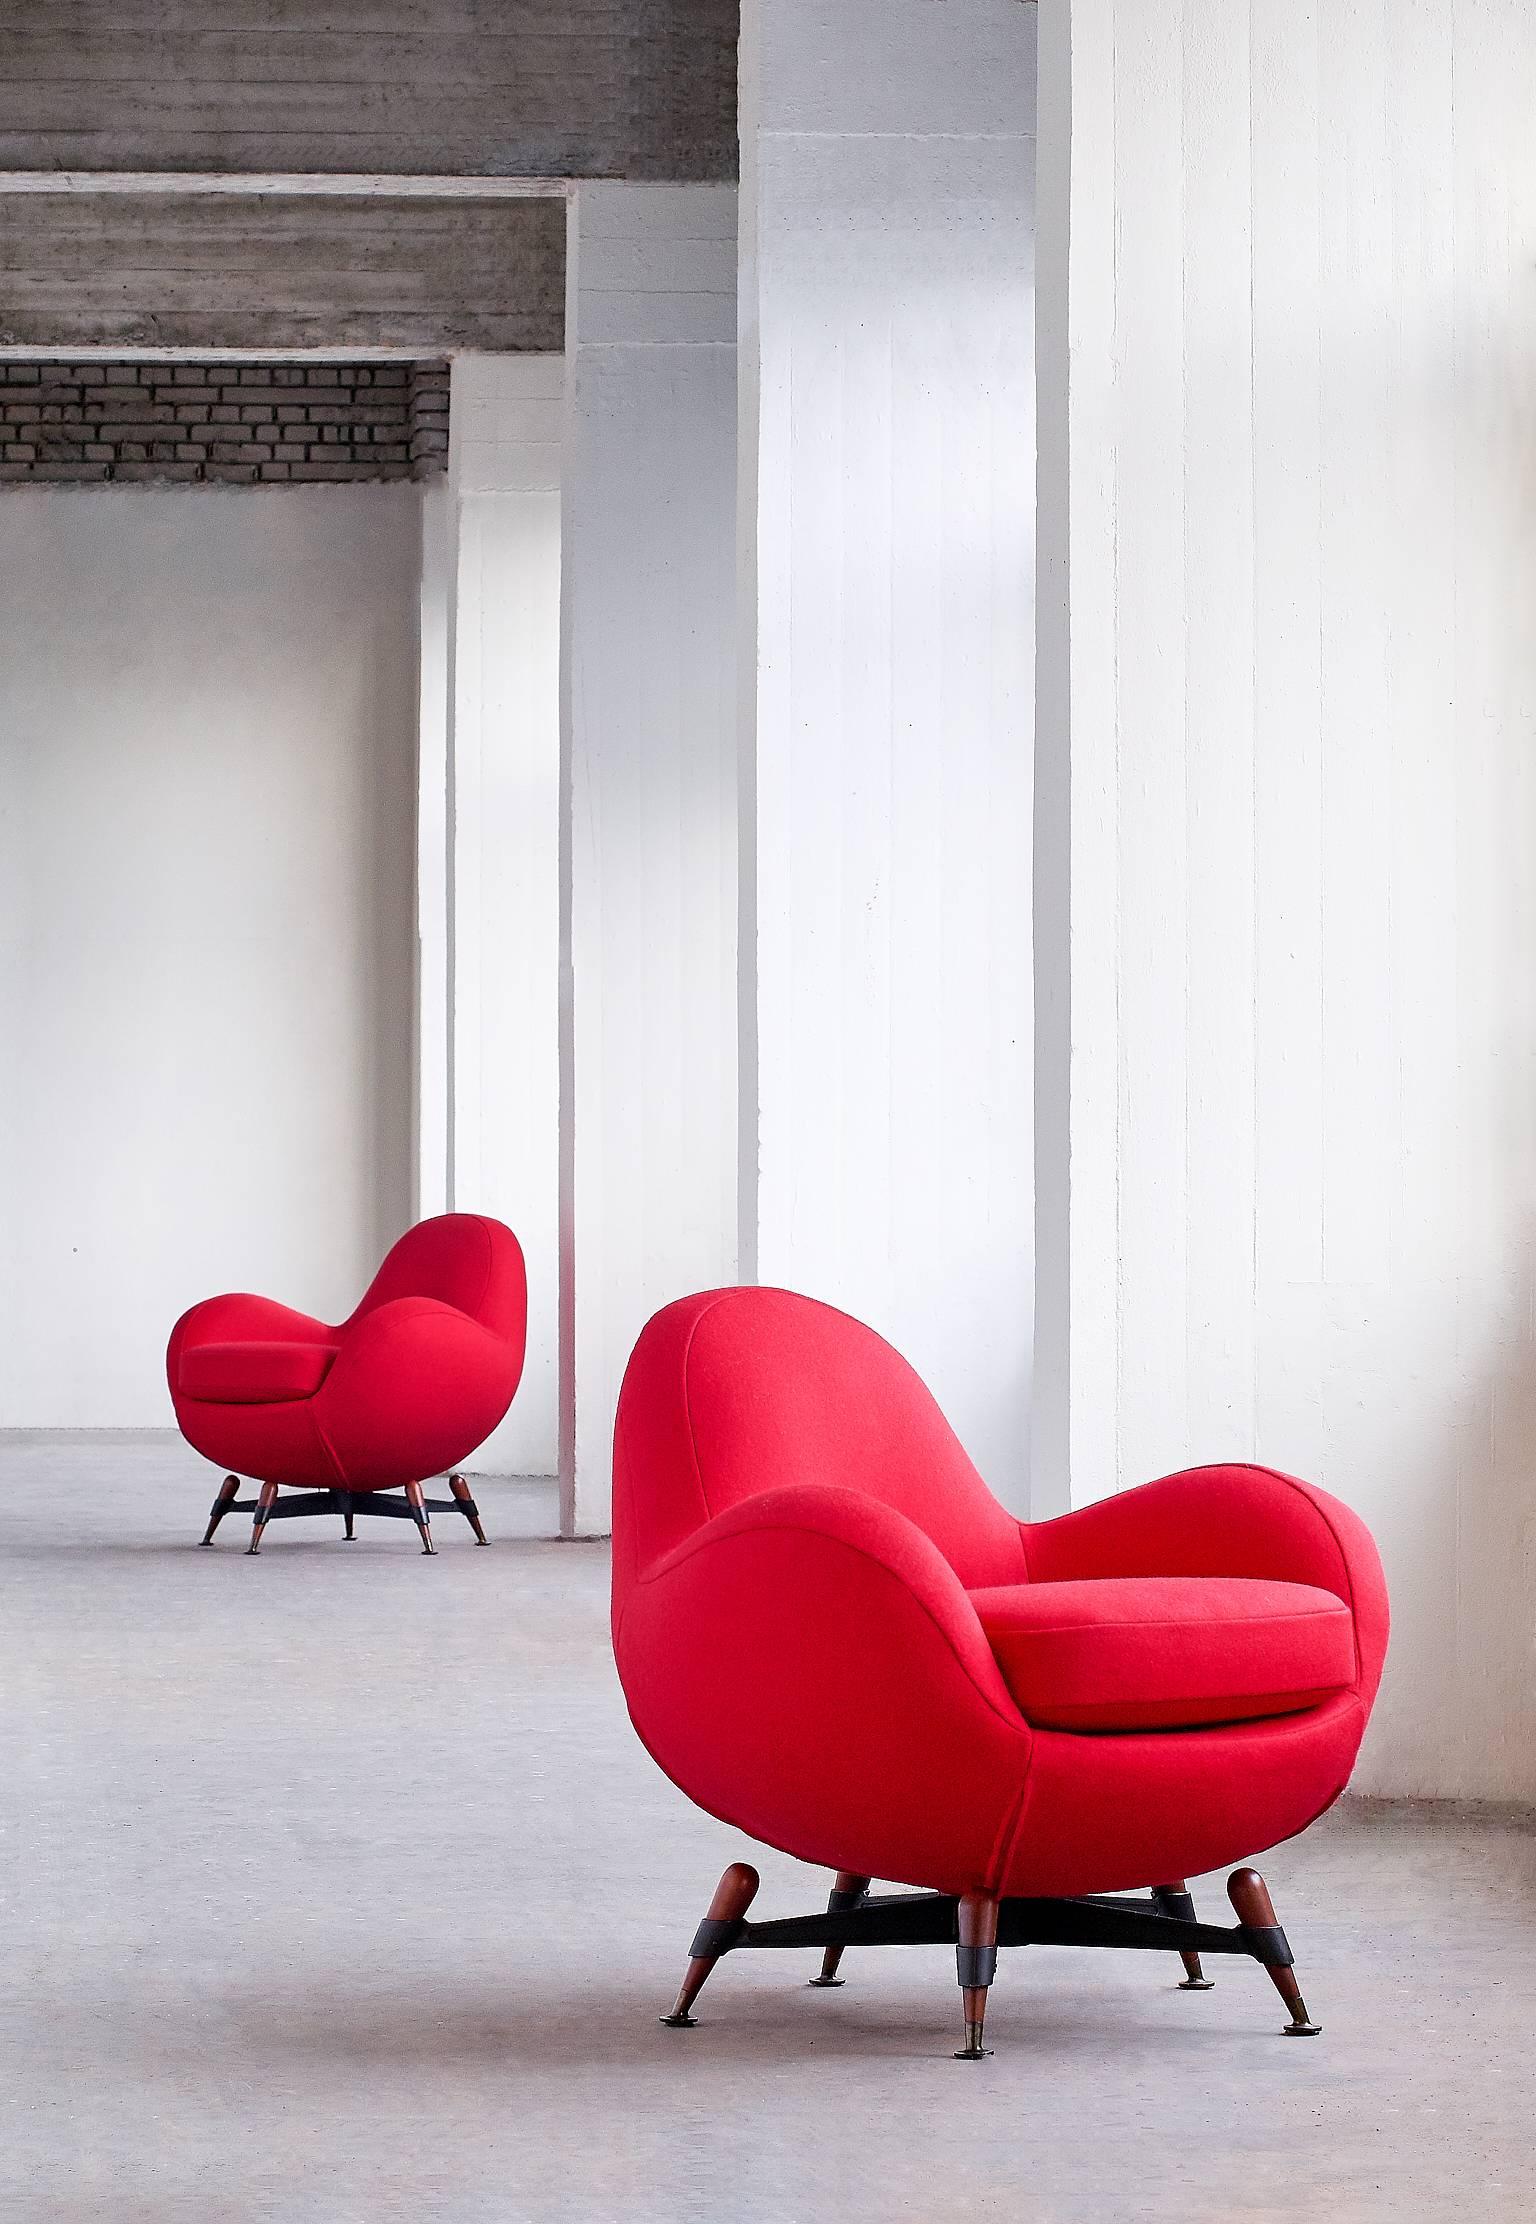 This exceptionally rare pair of swivel lounge chairs was designed by Rito Valla in 1963. This model named 'Mercury' was produced by IPE in Bologna for only a limited period of time in the mid 1960s. 
The design is characterized by the playful,